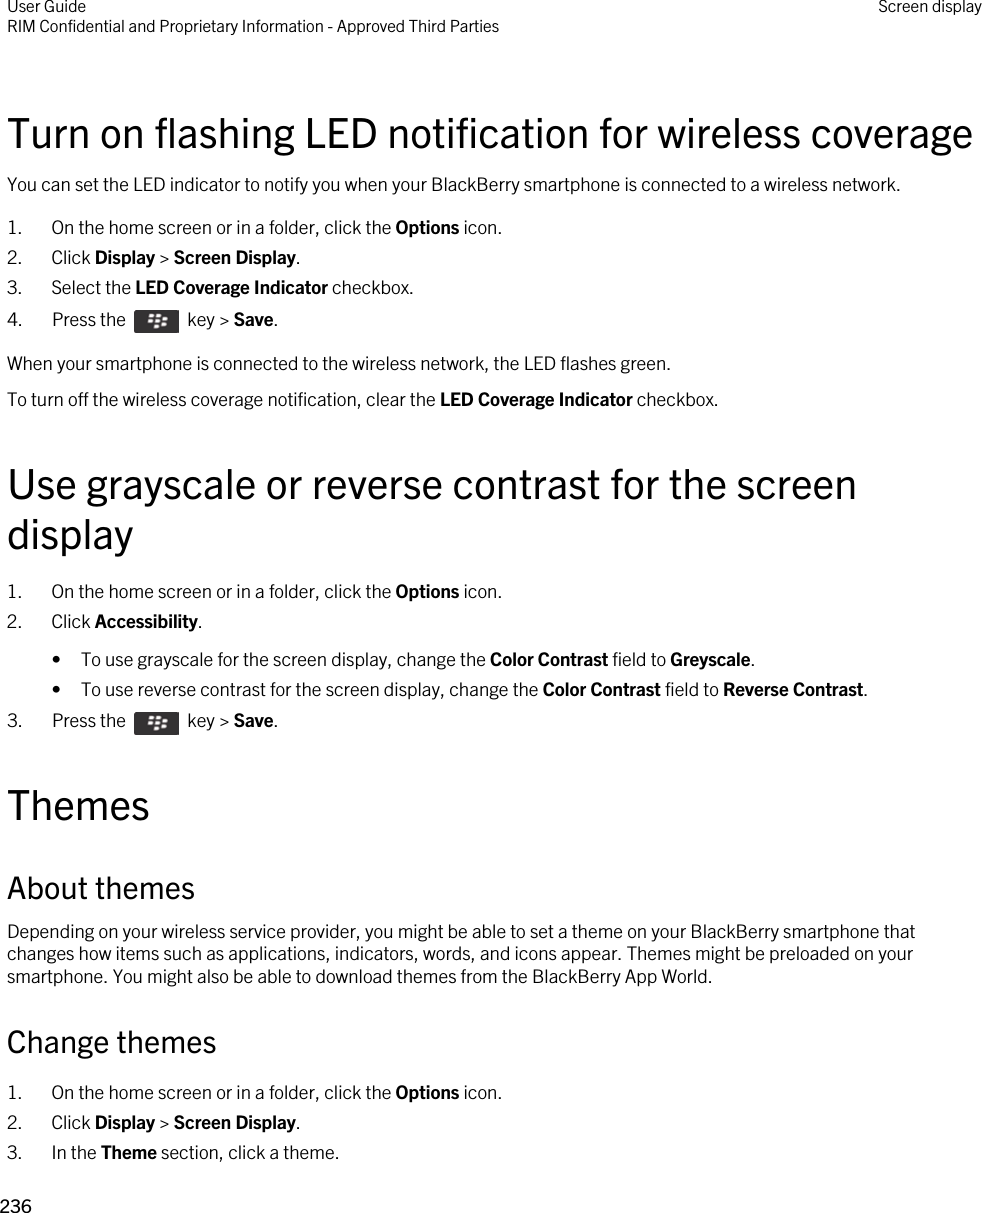 Turn on flashing LED notification for wireless coverageYou can set the LED indicator to notify you when your BlackBerry smartphone is connected to a wireless network.1. On the home screen or in a folder, click the Options icon.2. Click Display &gt; Screen Display.3. Select the LED Coverage Indicator checkbox.4.  Press the    key &gt; Save. When your smartphone is connected to the wireless network, the LED flashes green.To turn off the wireless coverage notification, clear the LED Coverage Indicator checkbox.Use grayscale or reverse contrast for the screen display1. On the home screen or in a folder, click the Options icon.2. Click Accessibility.• To use grayscale for the screen display, change the Color Contrast field to Greyscale.• To use reverse contrast for the screen display, change the Color Contrast field to Reverse Contrast.3.  Press the    key &gt; Save. ThemesAbout themesDepending on your wireless service provider, you might be able to set a theme on your BlackBerry smartphone that changes how items such as applications, indicators, words, and icons appear. Themes might be preloaded on your smartphone. You might also be able to download themes from the BlackBerry App World.Change themes1. On the home screen or in a folder, click the Options icon.2. Click Display &gt; Screen Display.3. In the Theme section, click a theme.User GuideRIM Confidential and Proprietary Information - Approved Third Parties Screen display236 